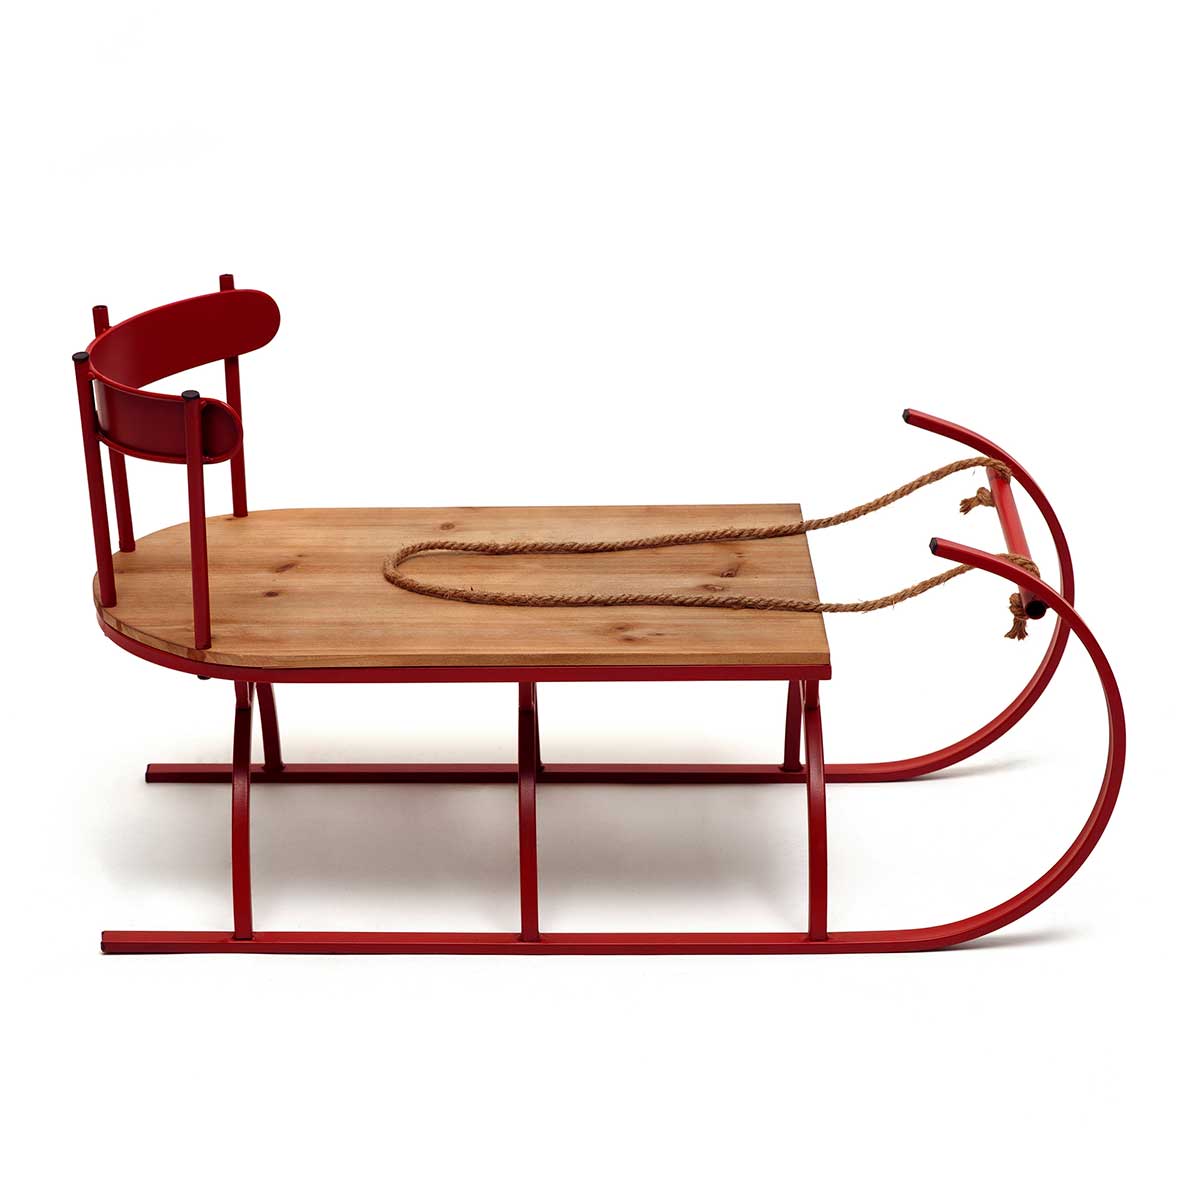 METAL SLED RED WITH NATURAL WOOD SEACHT AND ROPE HANDLE